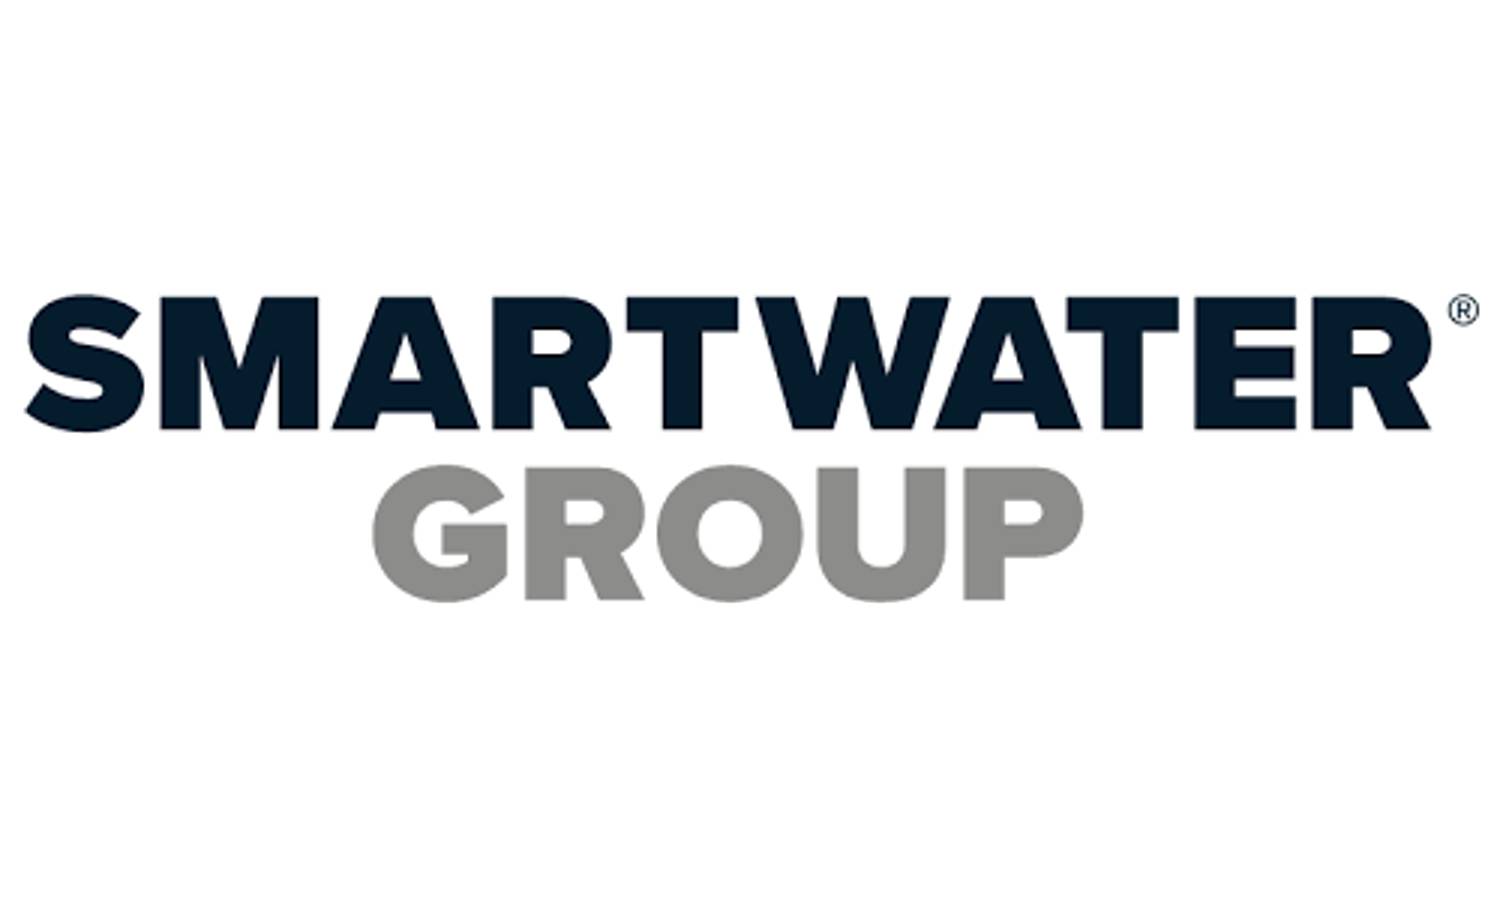 The SmartWater Group brings crime deterrent solutions to IFSEC International 2022